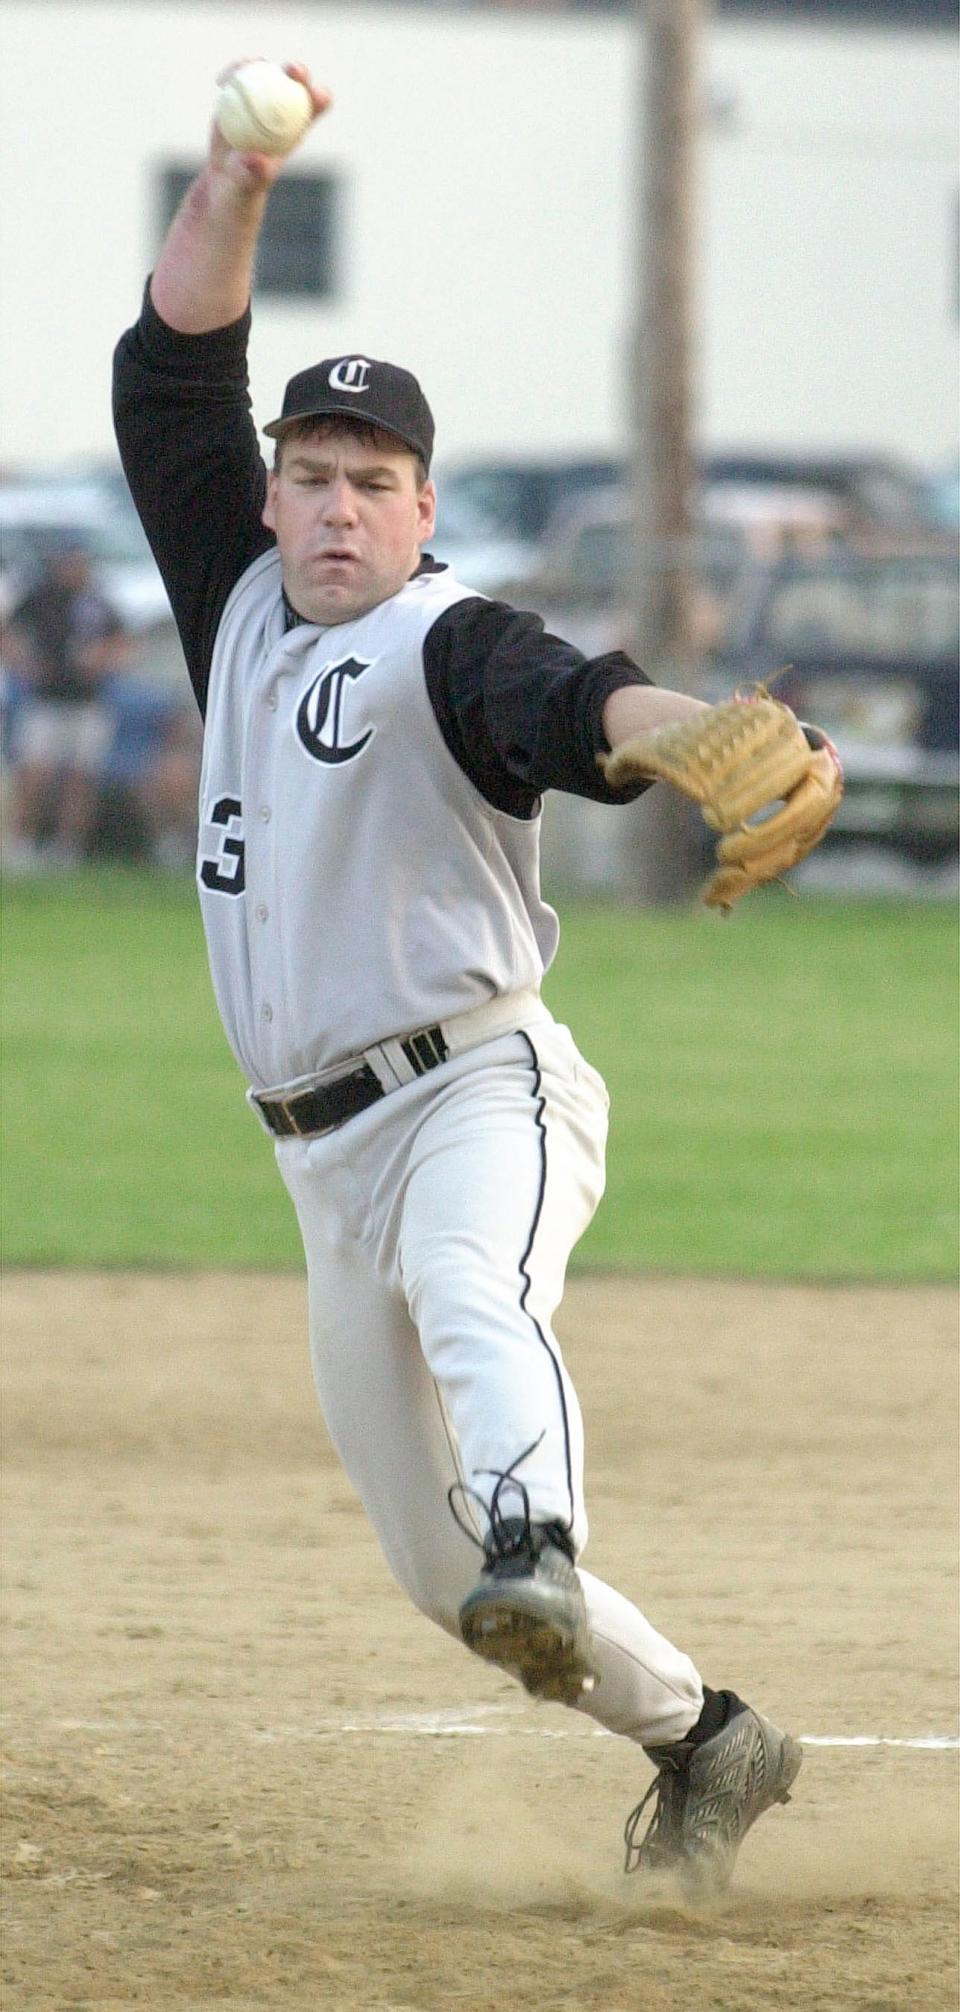 In this Erie Times-News file photo, Hugh Hillhouse pitches for Carpetowne in a 2001 game against Budweiser. Hillhouse will be inducted into the Metropolitan Erie Sports Hall of Fame on June 28.